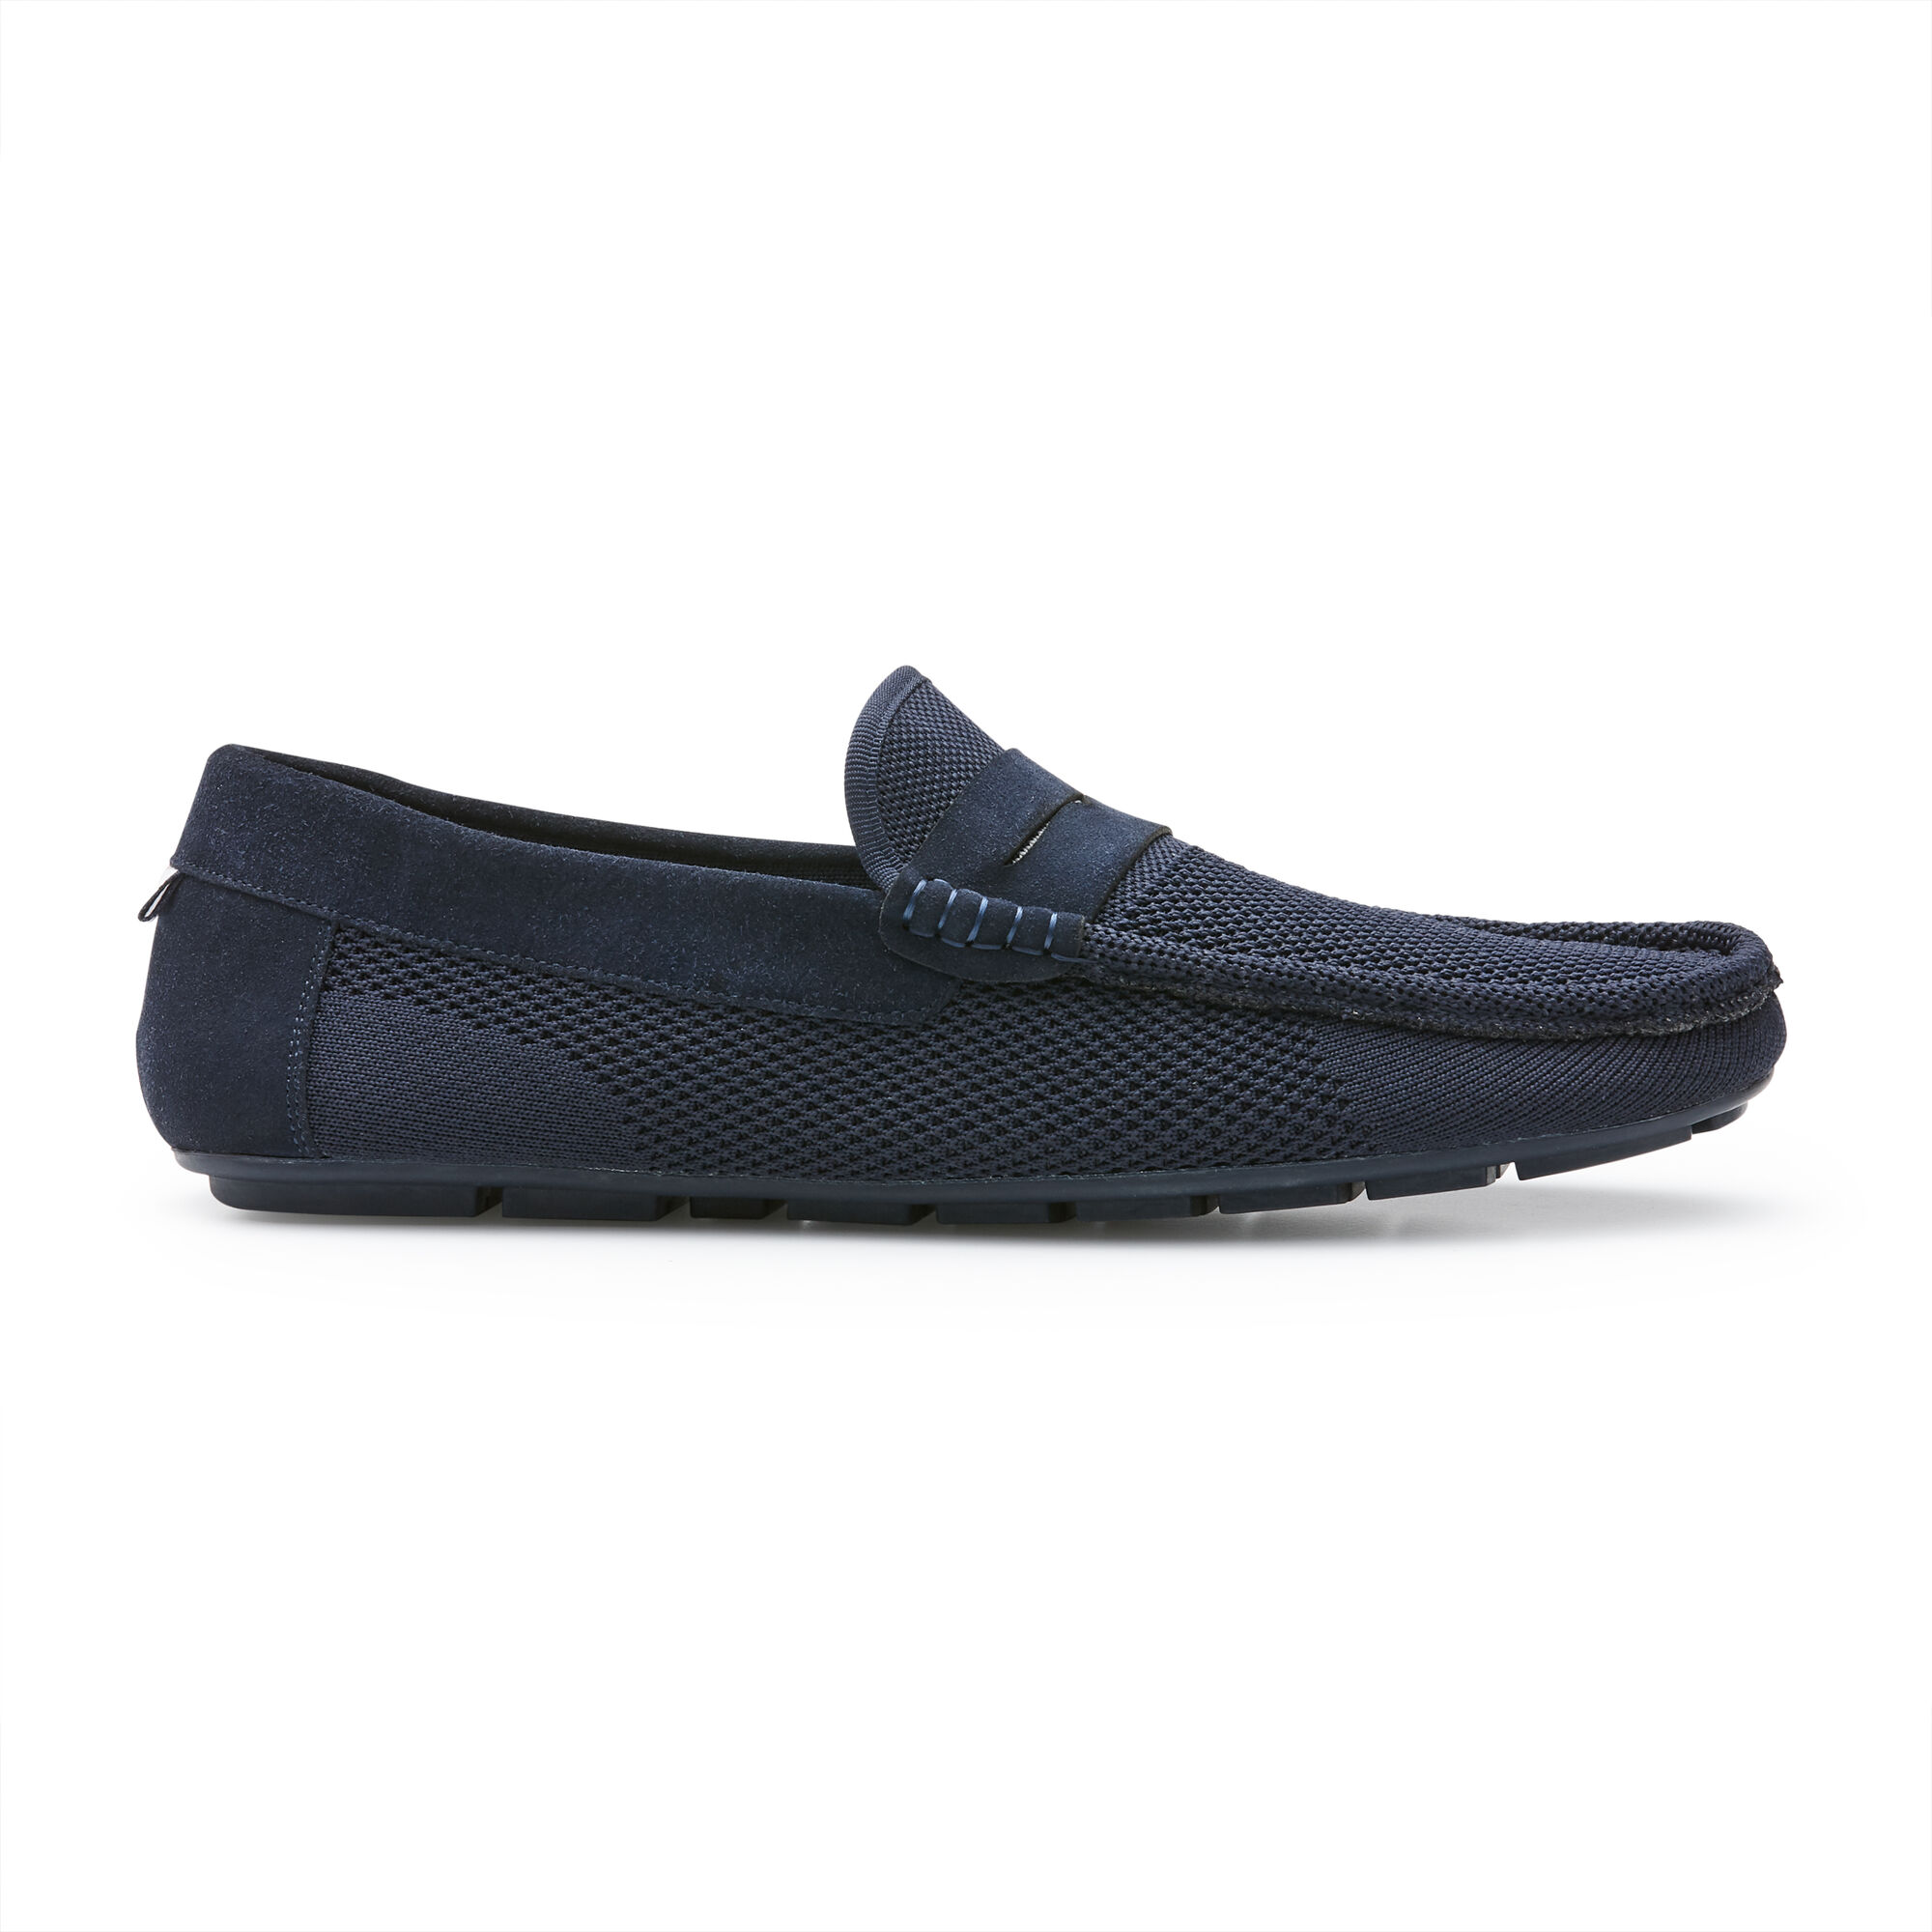 Favaro - Navy - Suede Leather Flyknit Driving Shoes | Casual Shoes ...